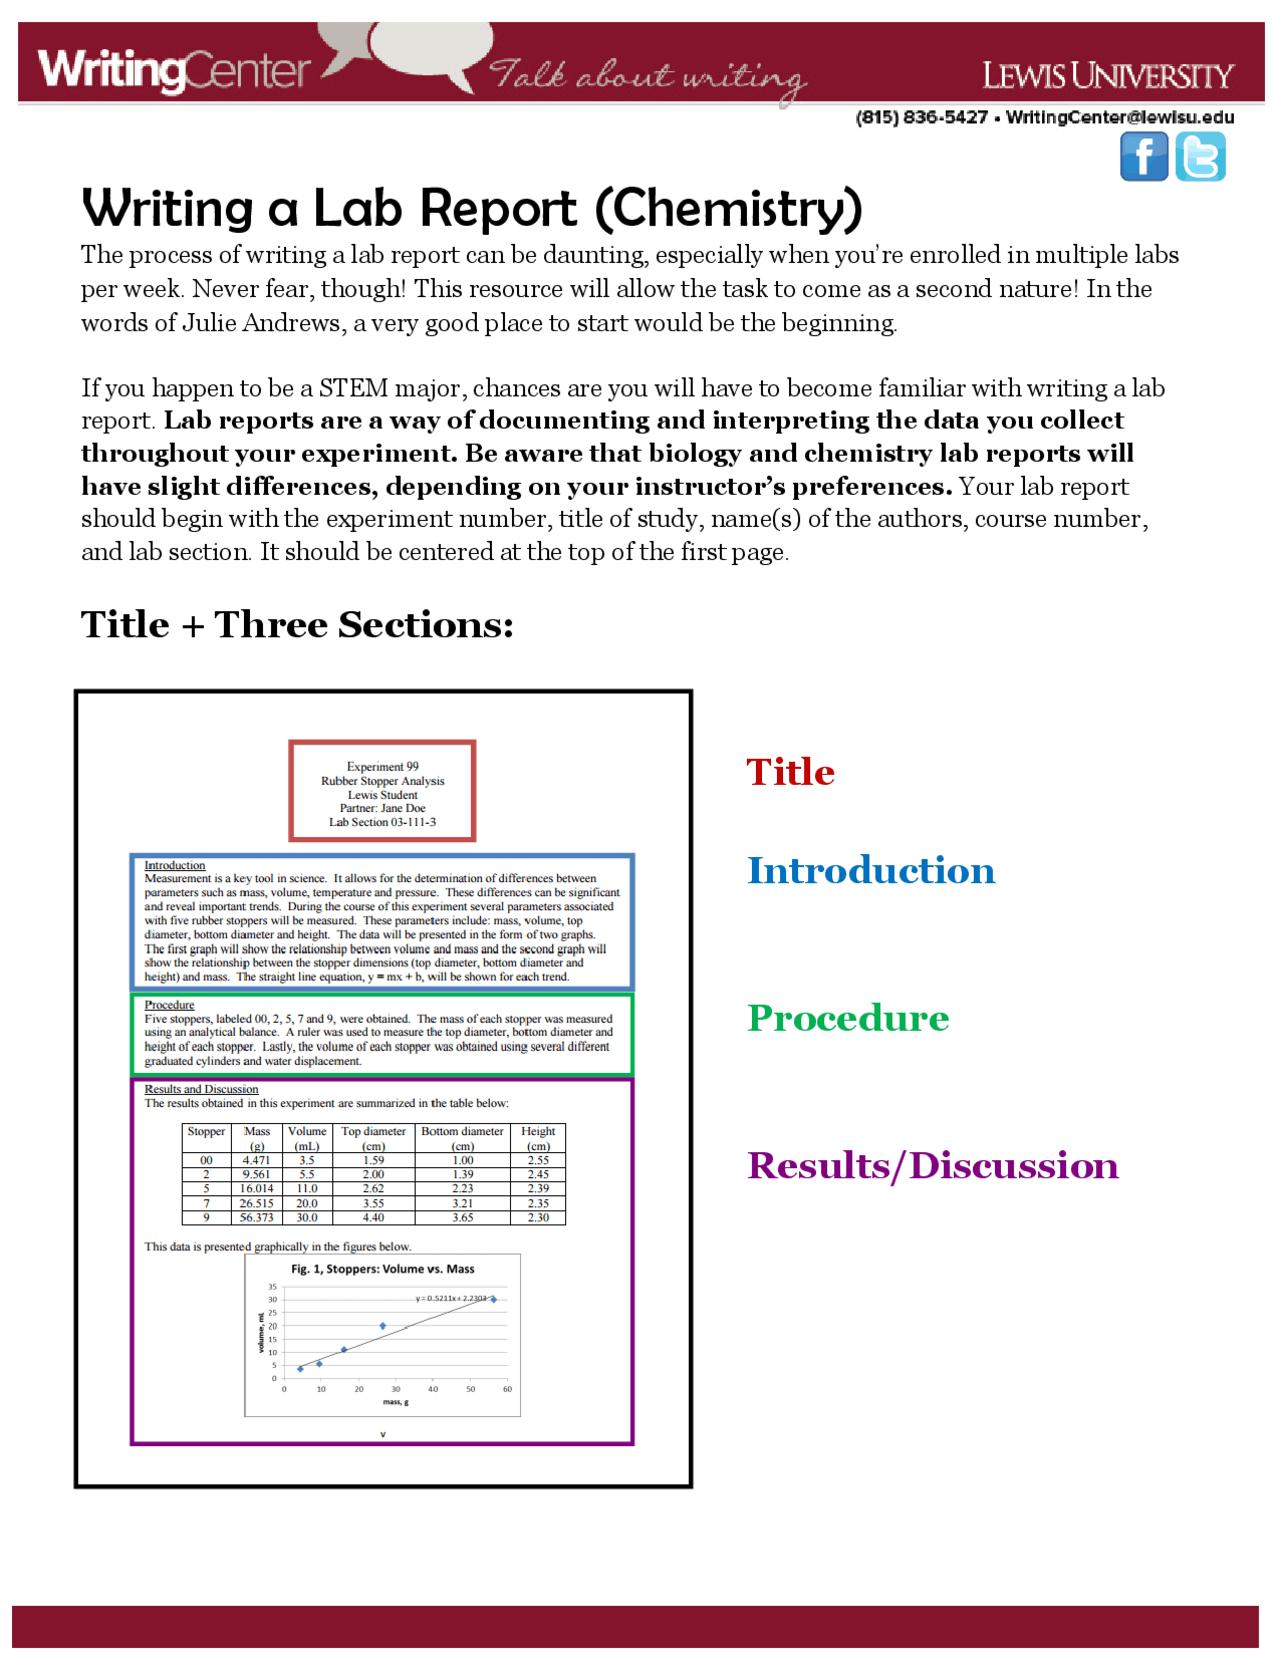 Formal lab report example chemistry  Study Guides, Projects  With Regard To Lab Report Template Chemistry